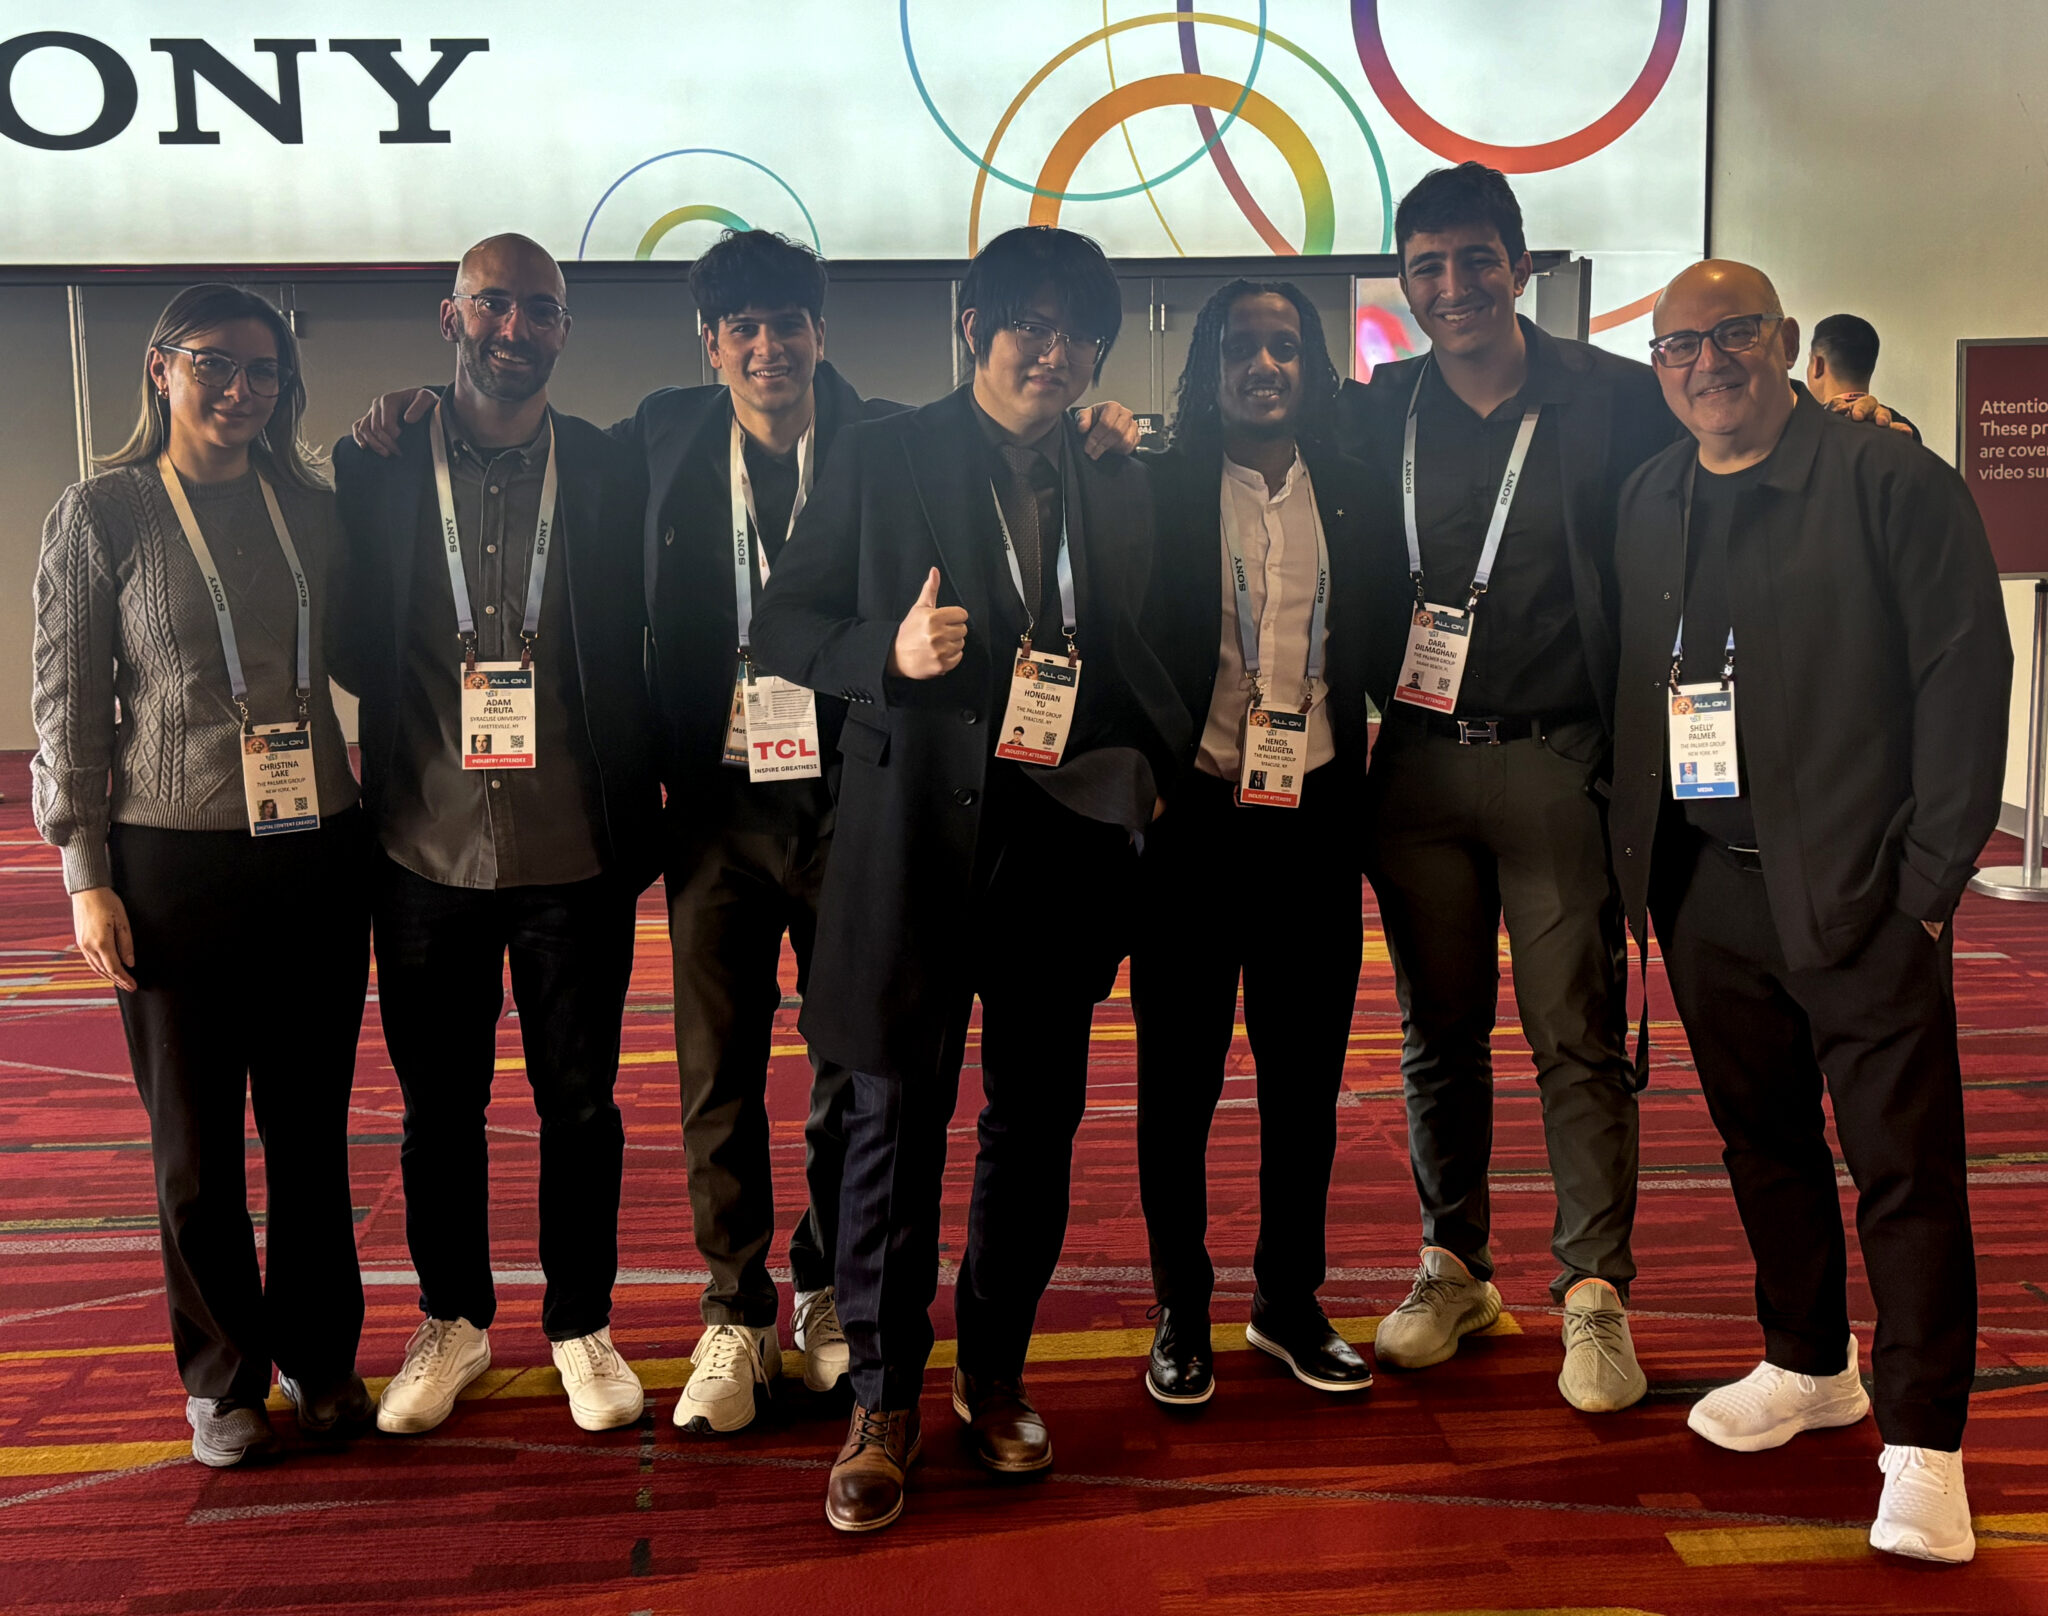 seven people pose together on the floor of the CES tech event